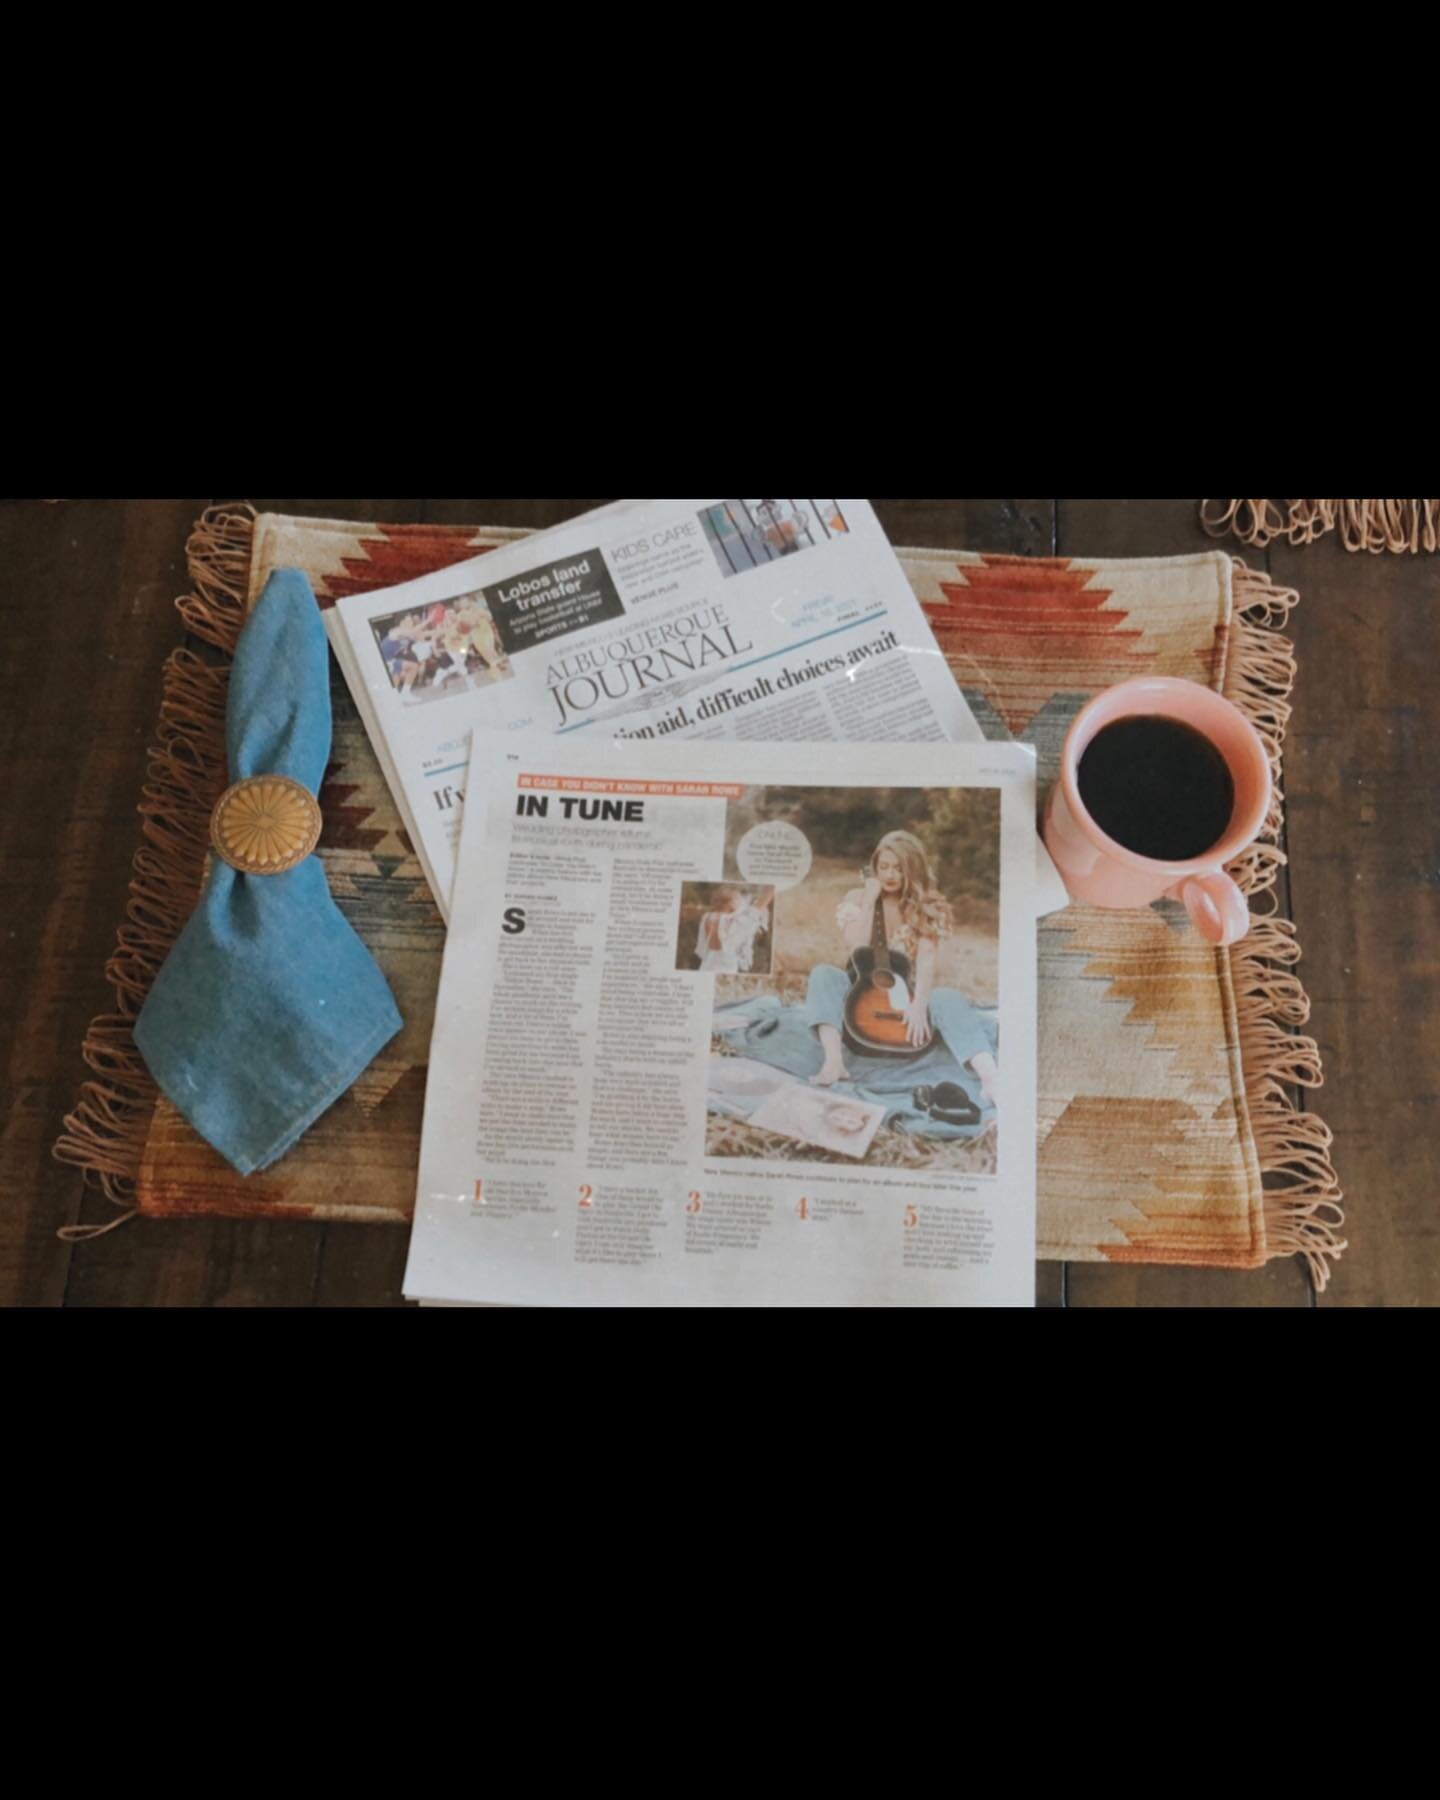 &ldquo;My favorite time of the day is the morning, because I love the reset. I like waking up and checking in with myself, my body, and refocusing my goals and energy...... &amp; A nice cup of coffee.&rdquo; - (Albuquerque Journal) Section: V14 
&bul